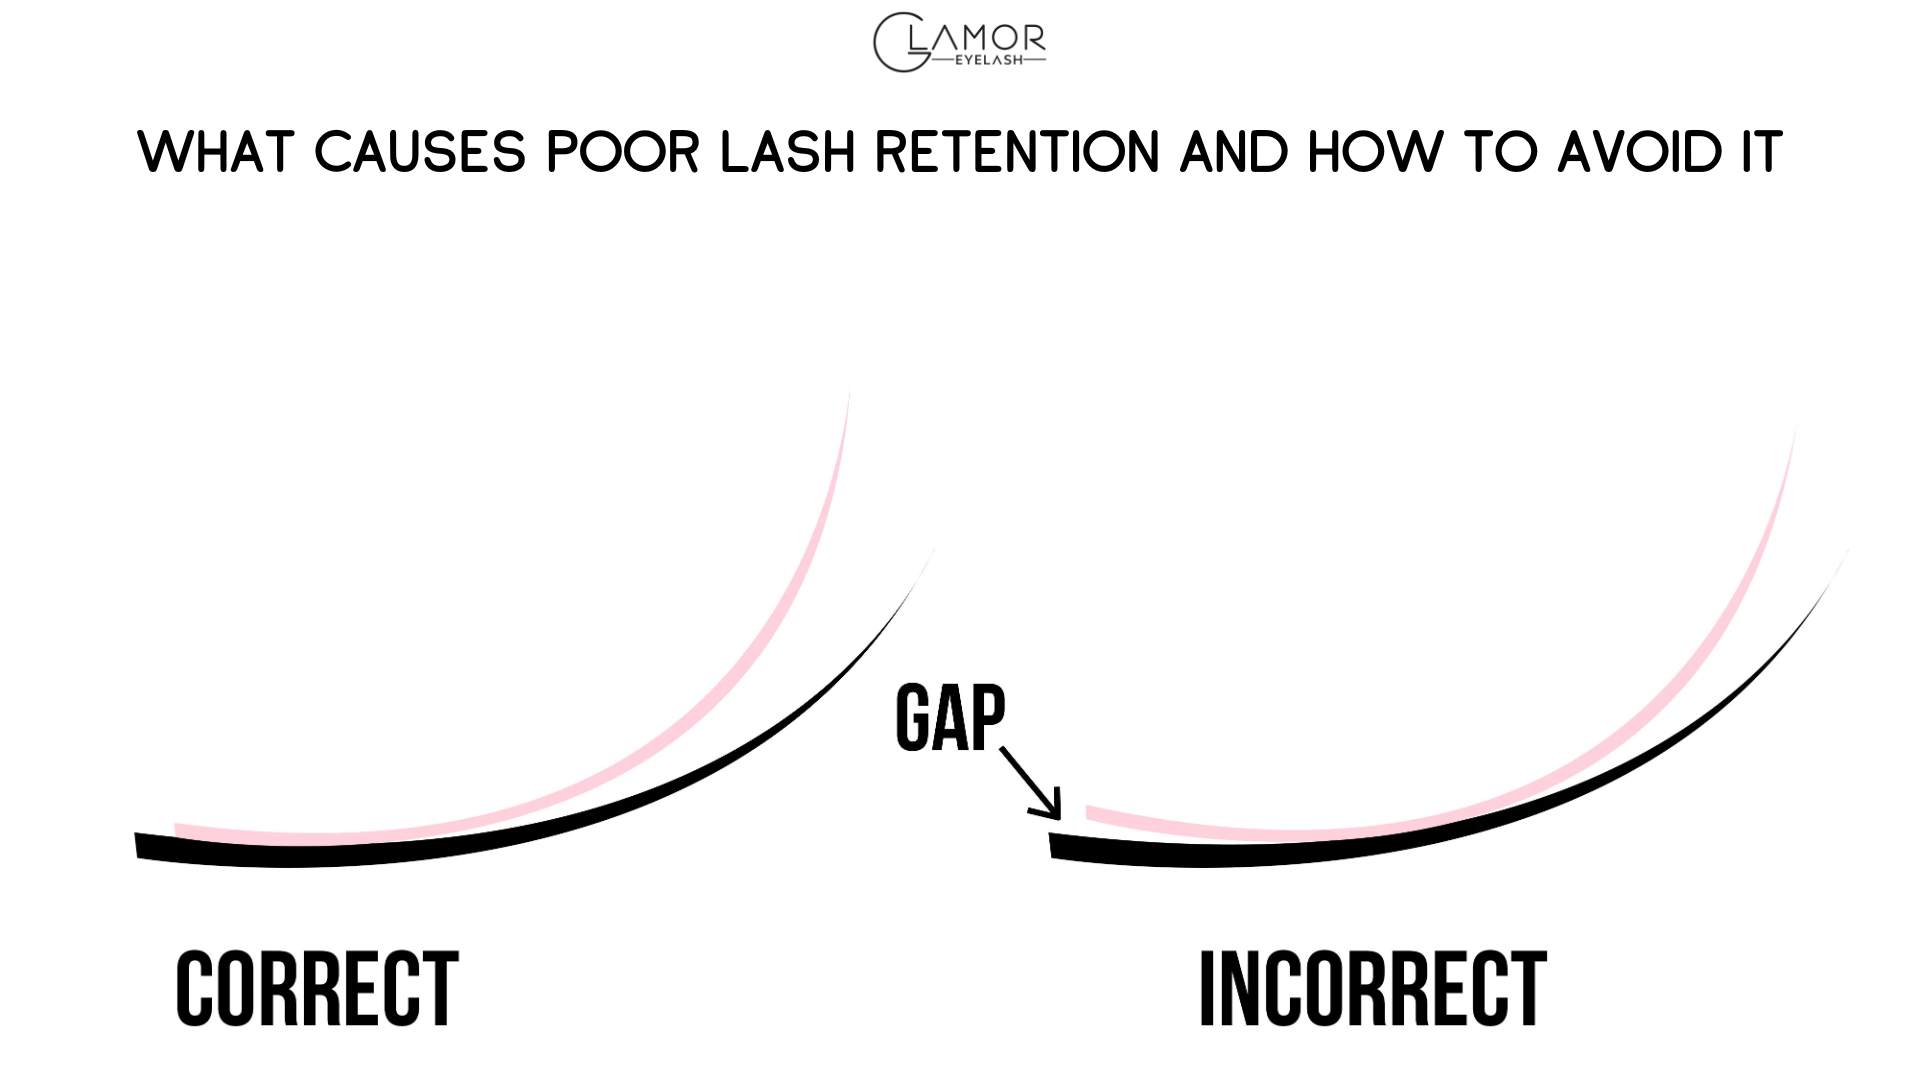 WHAT CAUSES POOR LASH RETENTION AND HOW TO AVOID IT